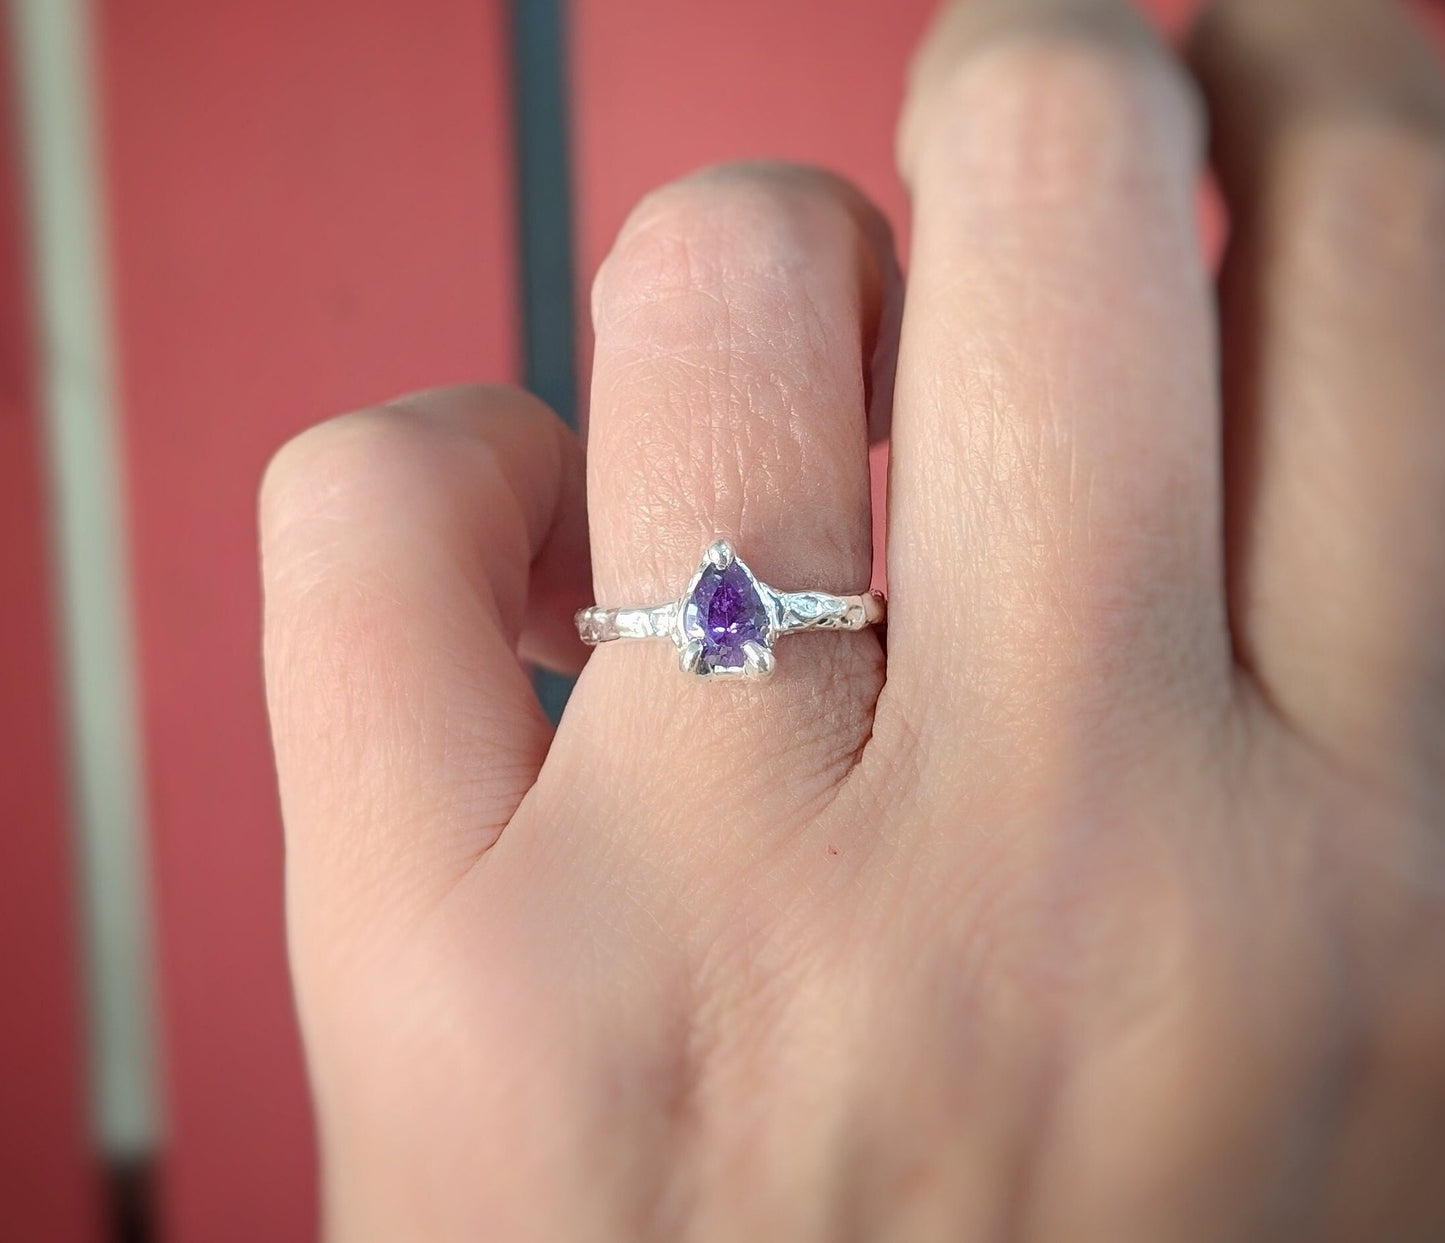 Pear shape Amethyst ring in Molten Silver setting on a woman's hand